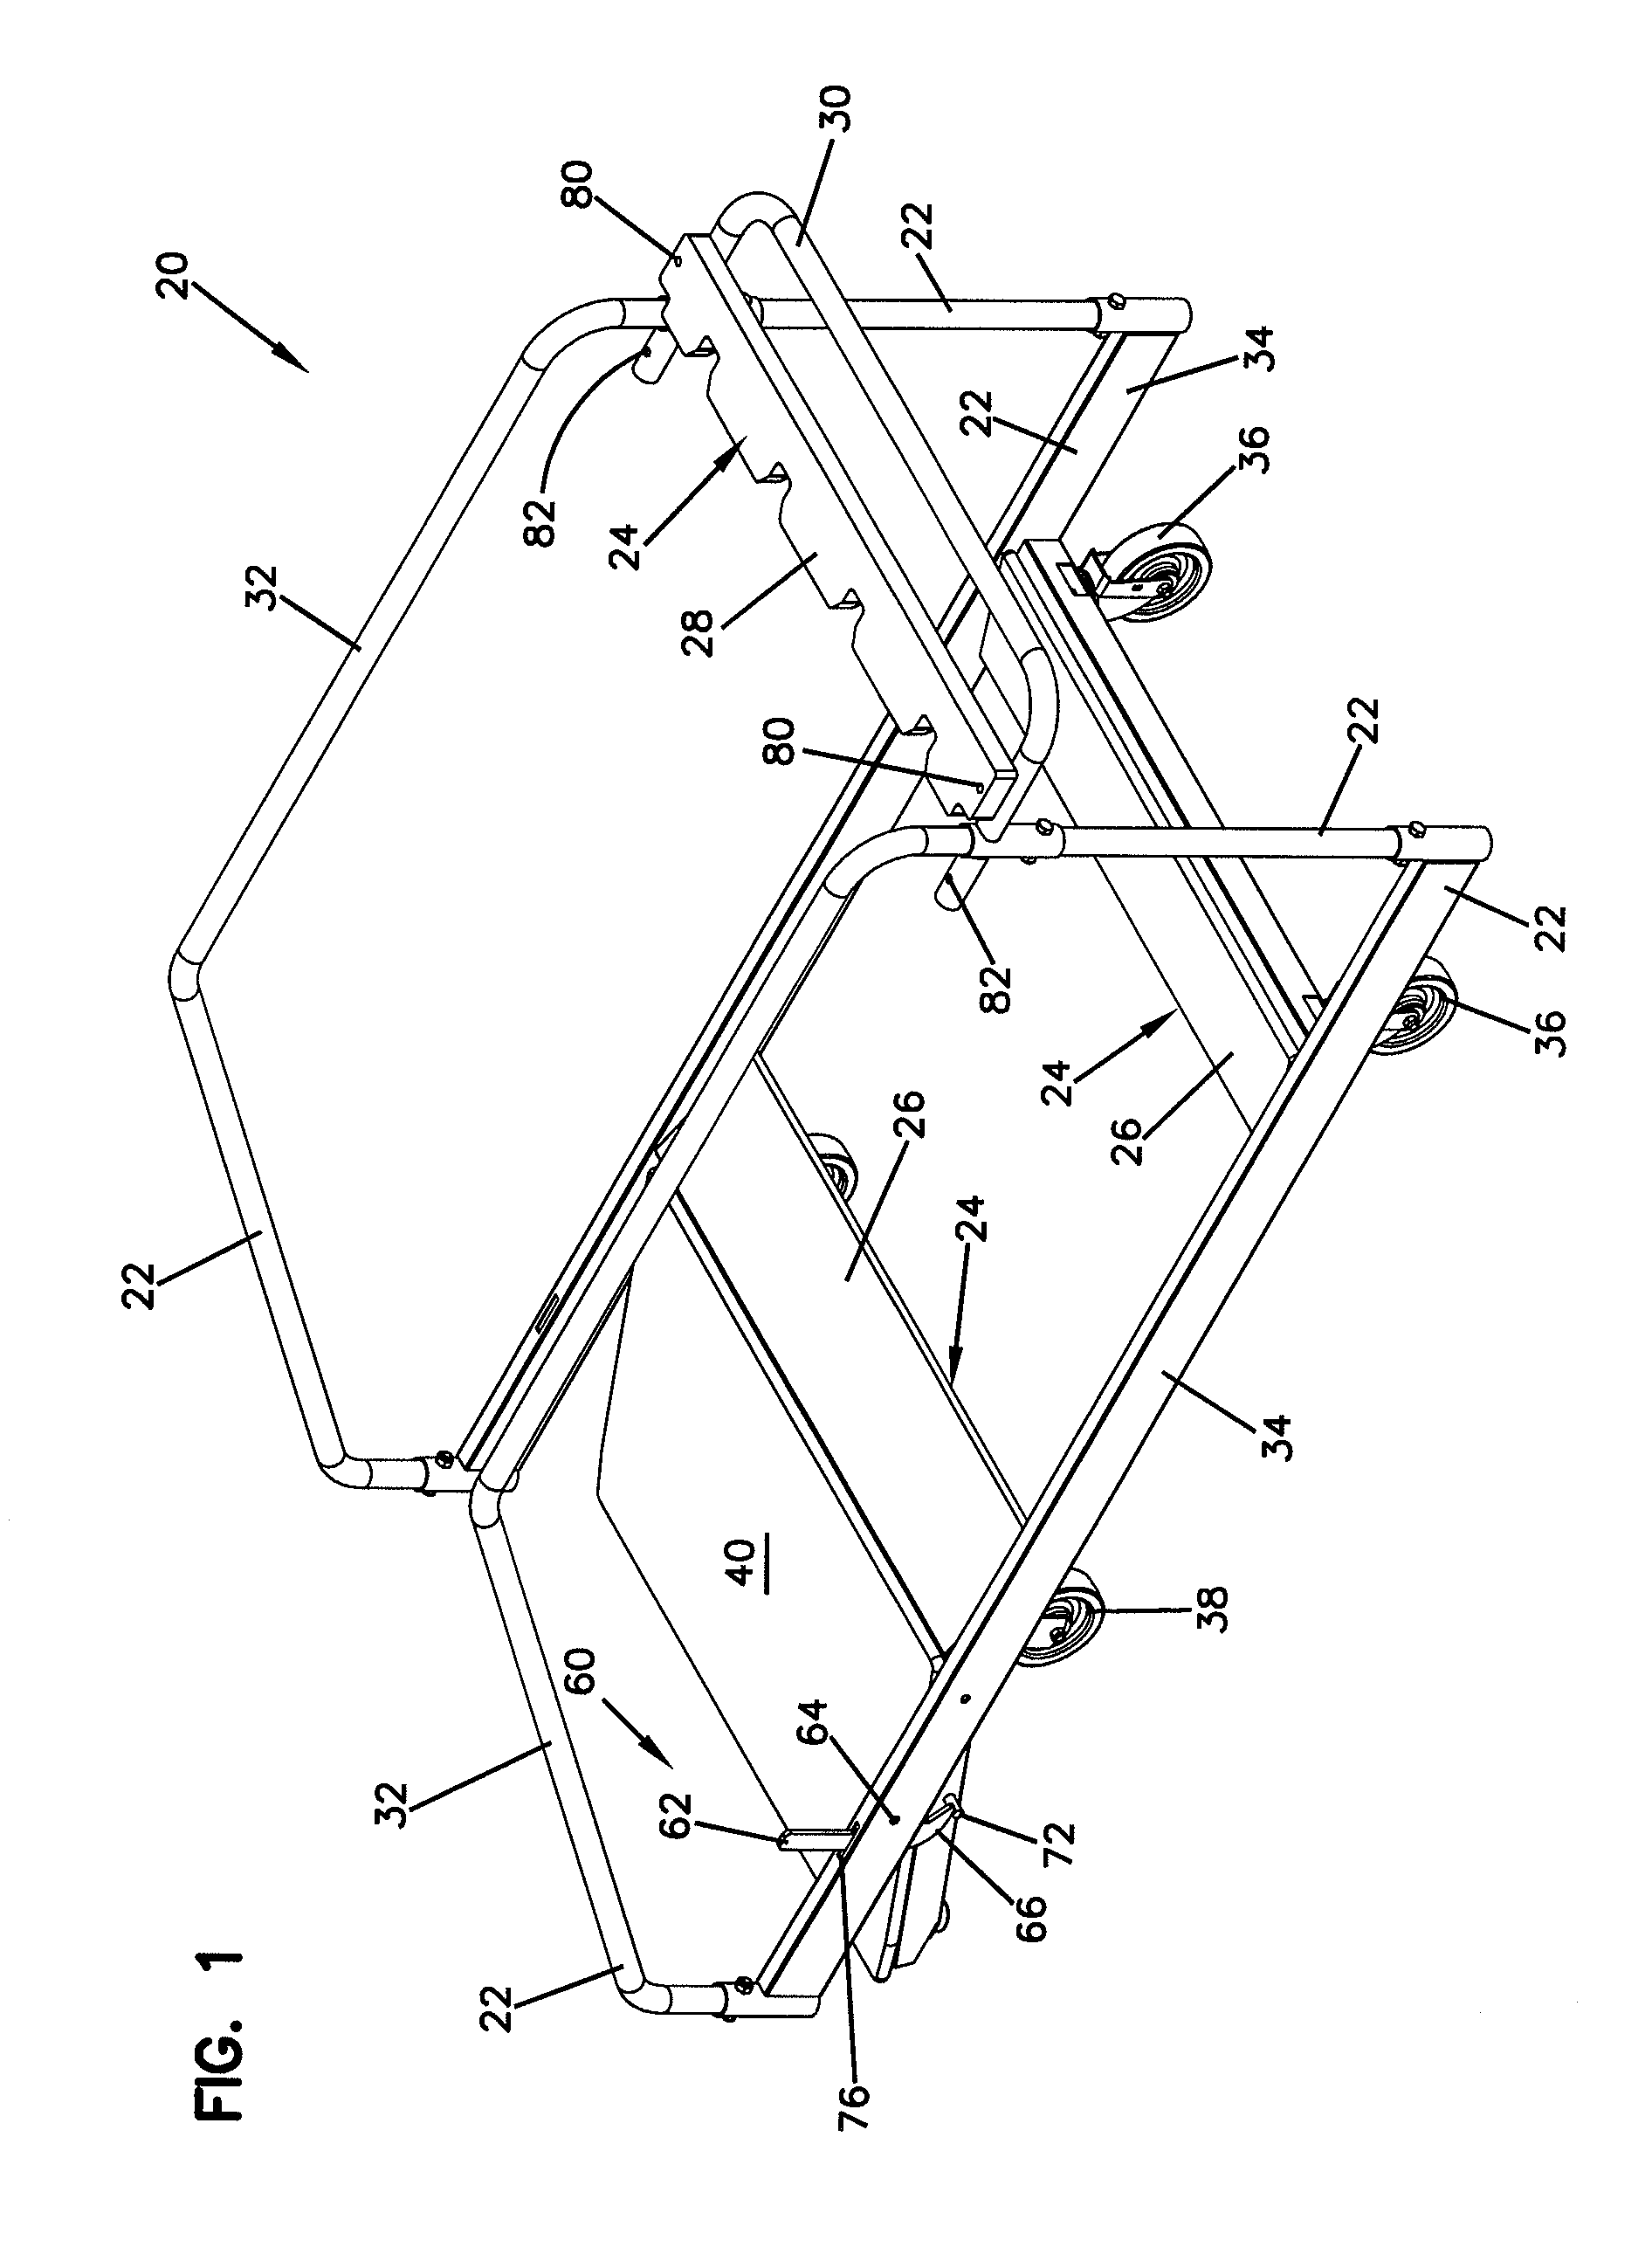 Folding table transportation and storage system